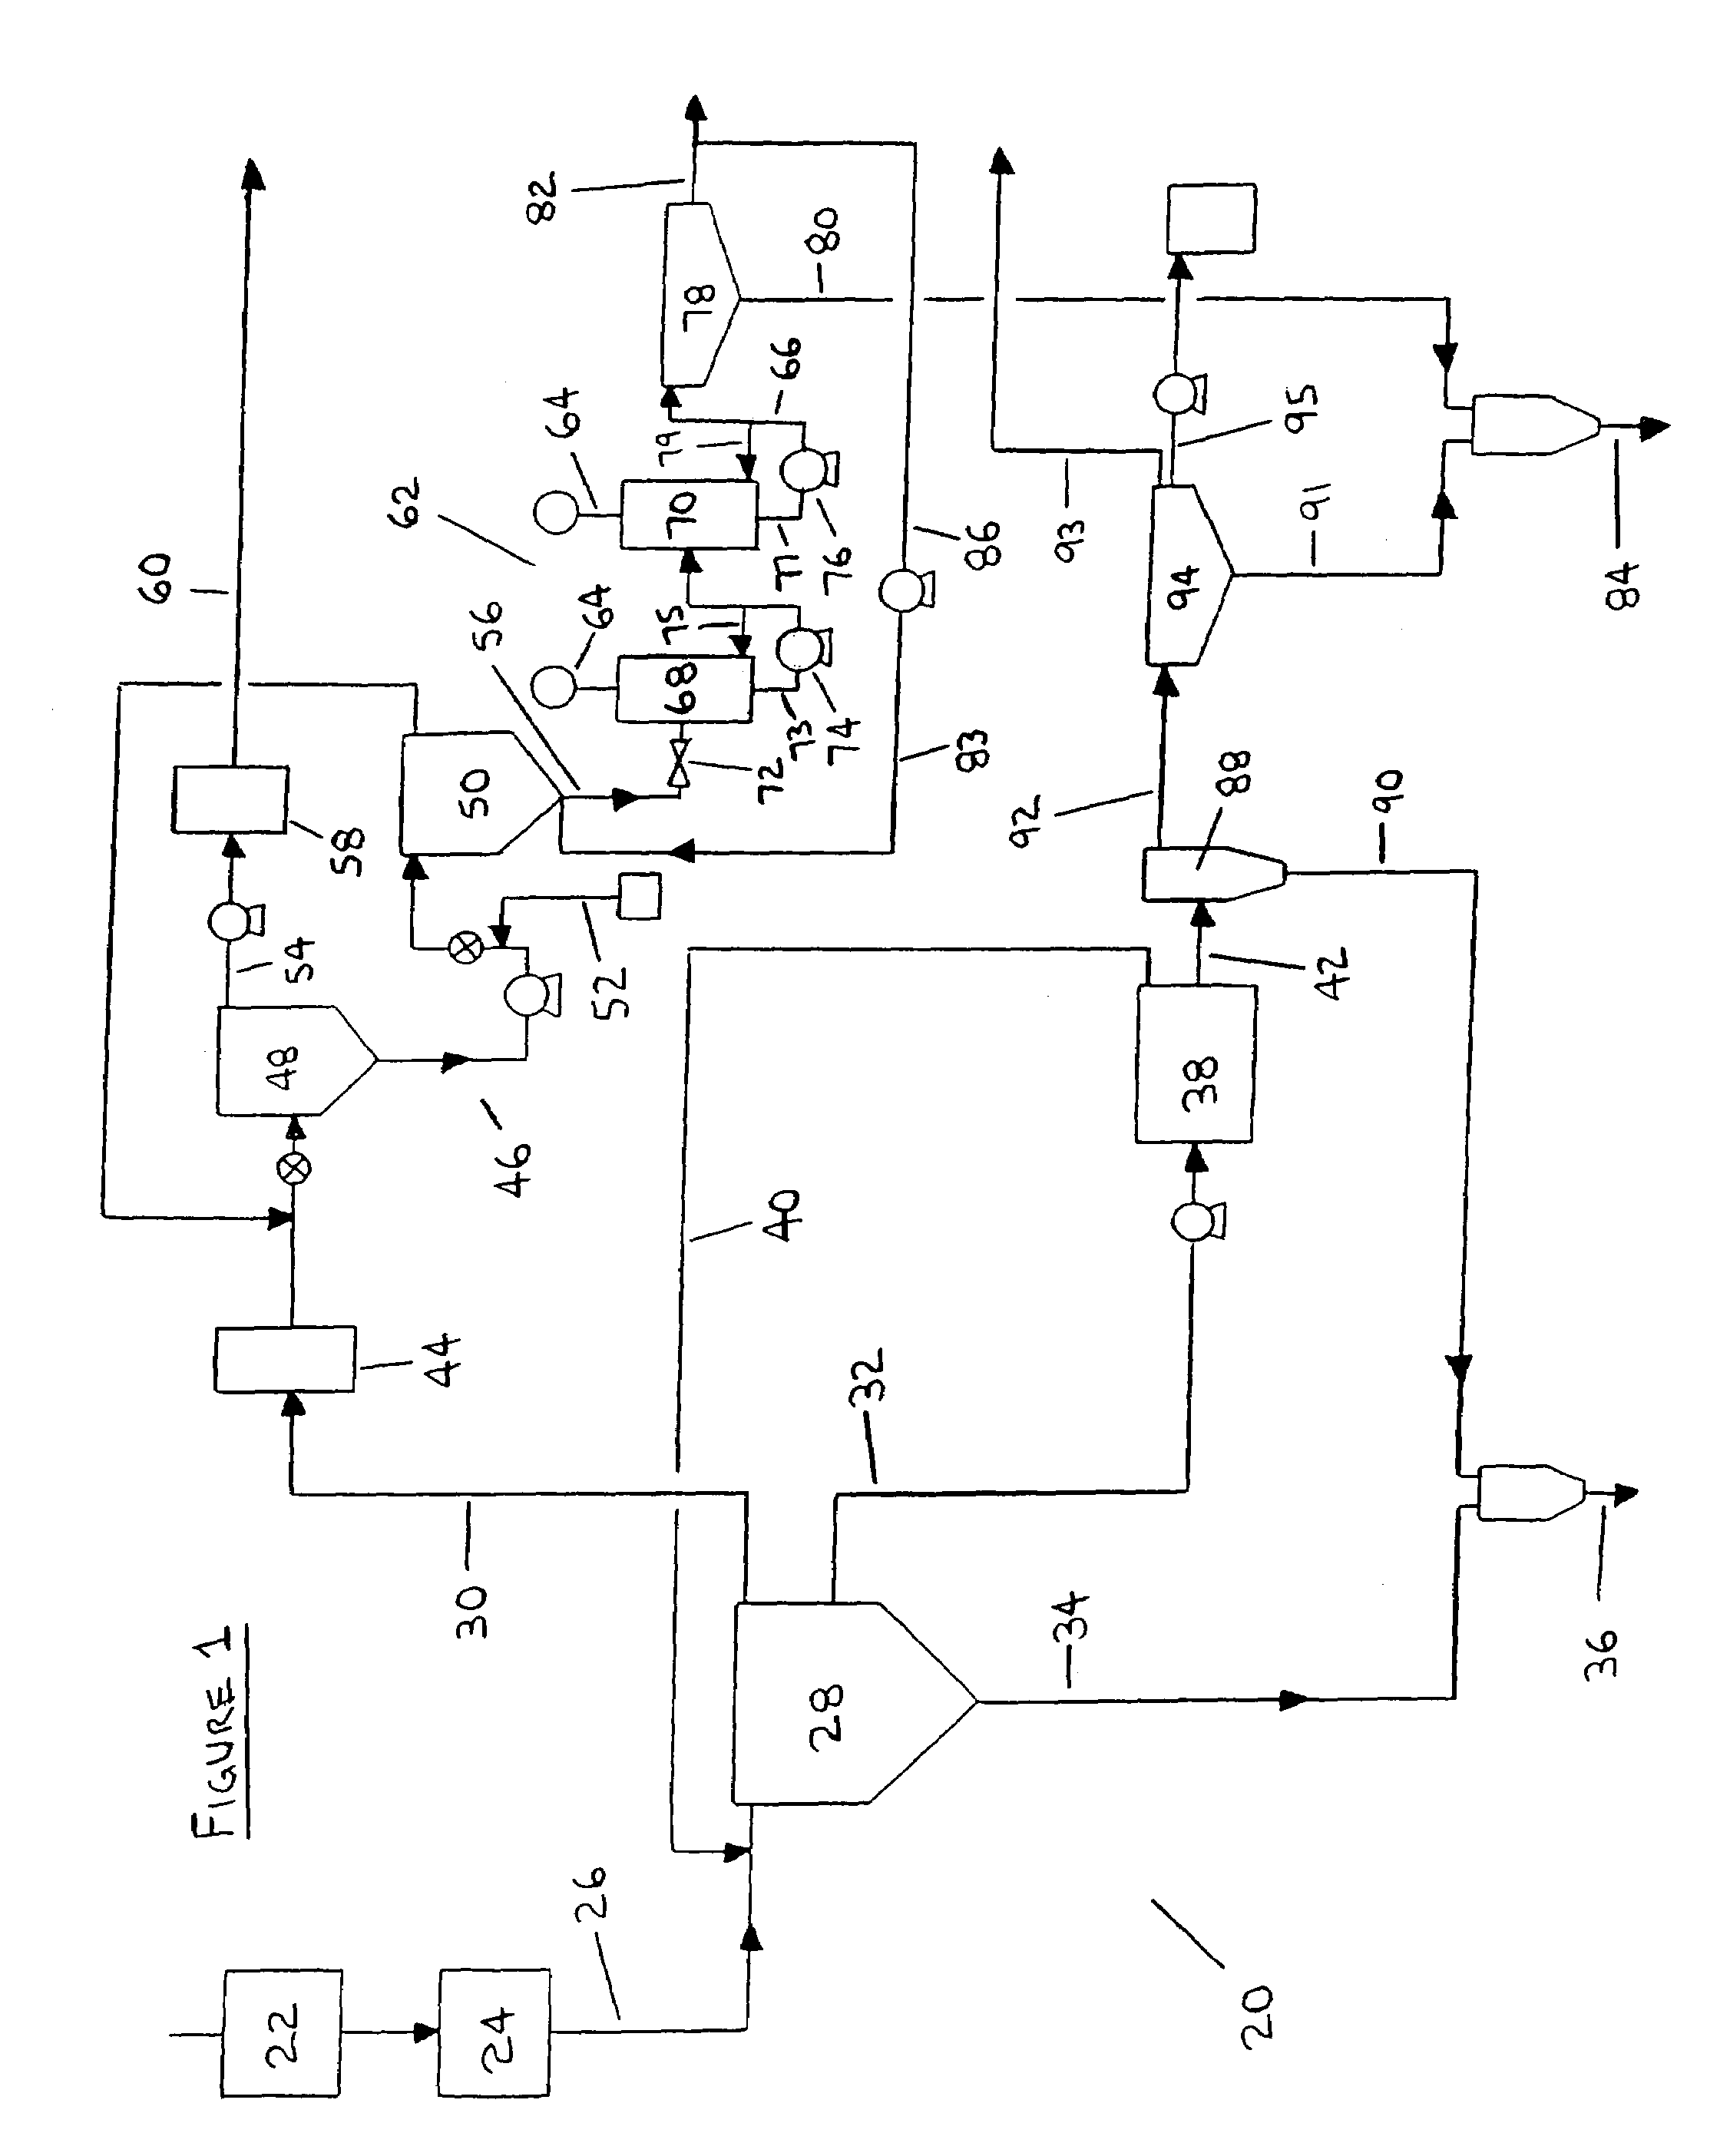 Process and apparatus for treating tailings